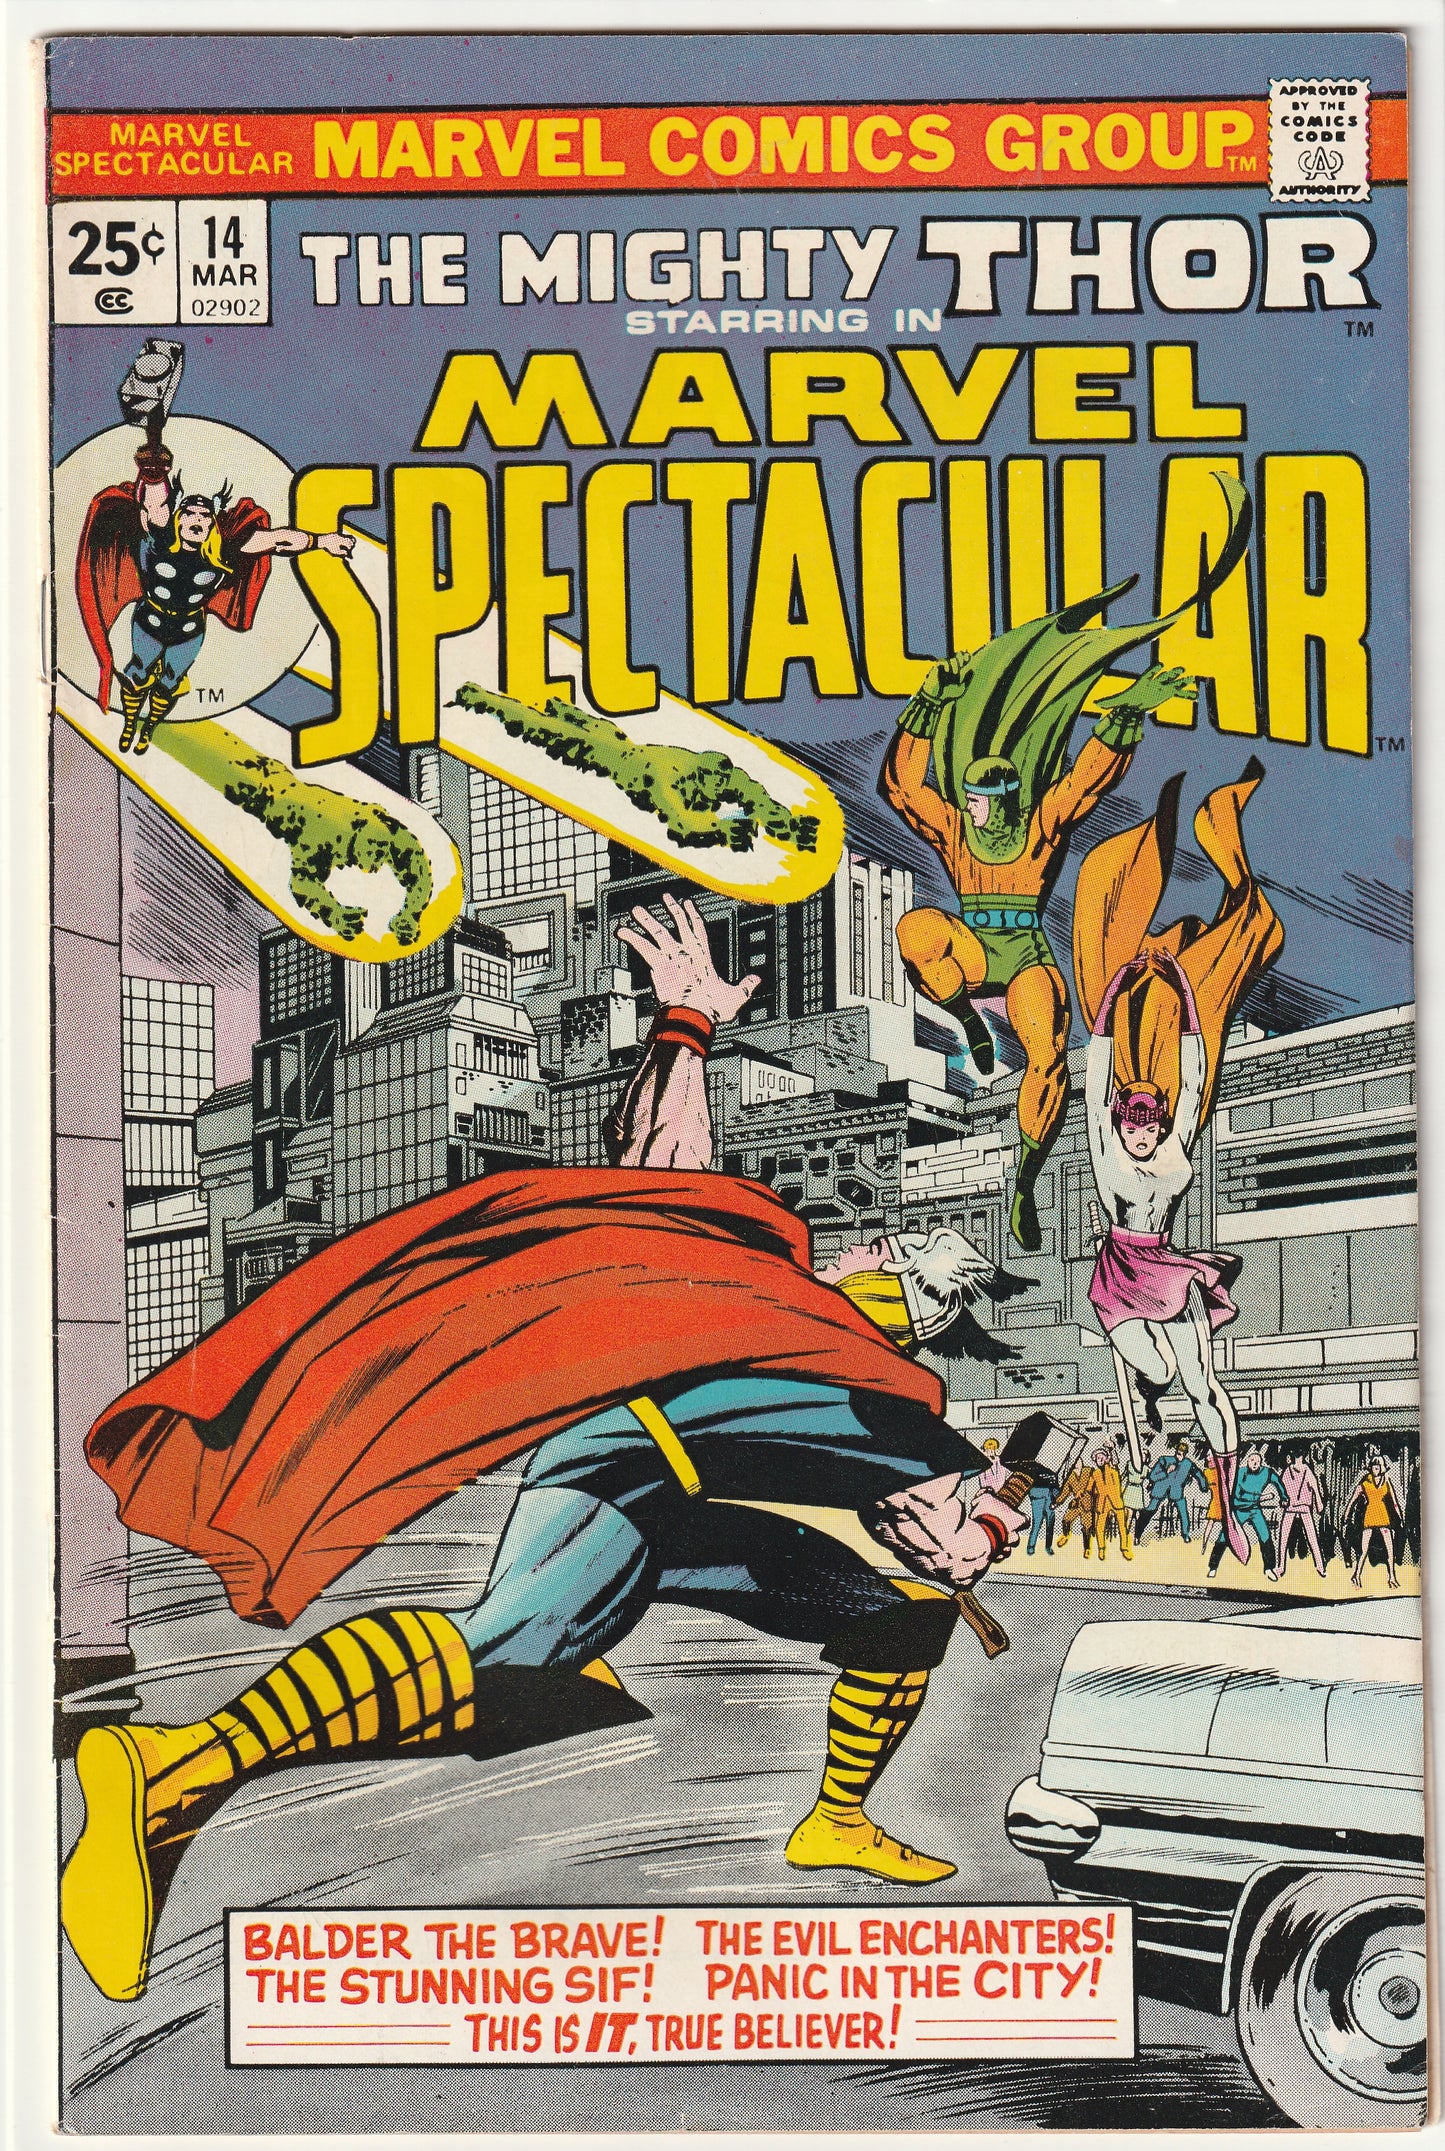 Marvel Spectacular #14 Starring The Mighty Thor (1975) - Stan Lee & Jack Kirby